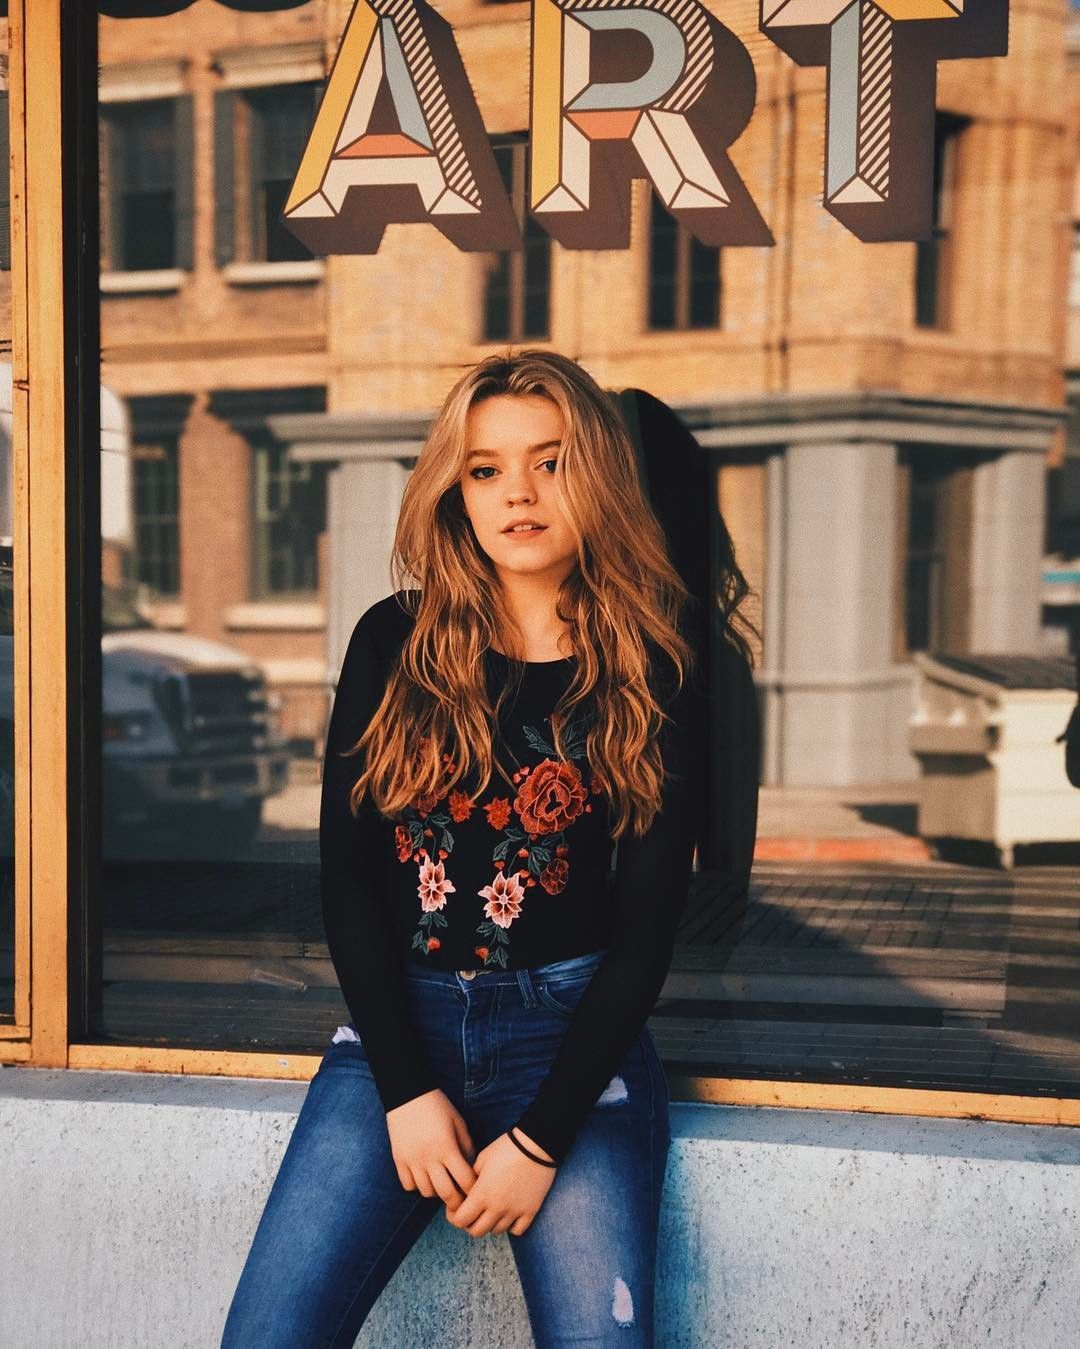 Jade Pettyjohn on Instagram: “Being an artist isn't hard to attain. YOU have an infinite amount of capability. Art is about c. Jade, Actresses, Jade pettyjohn age